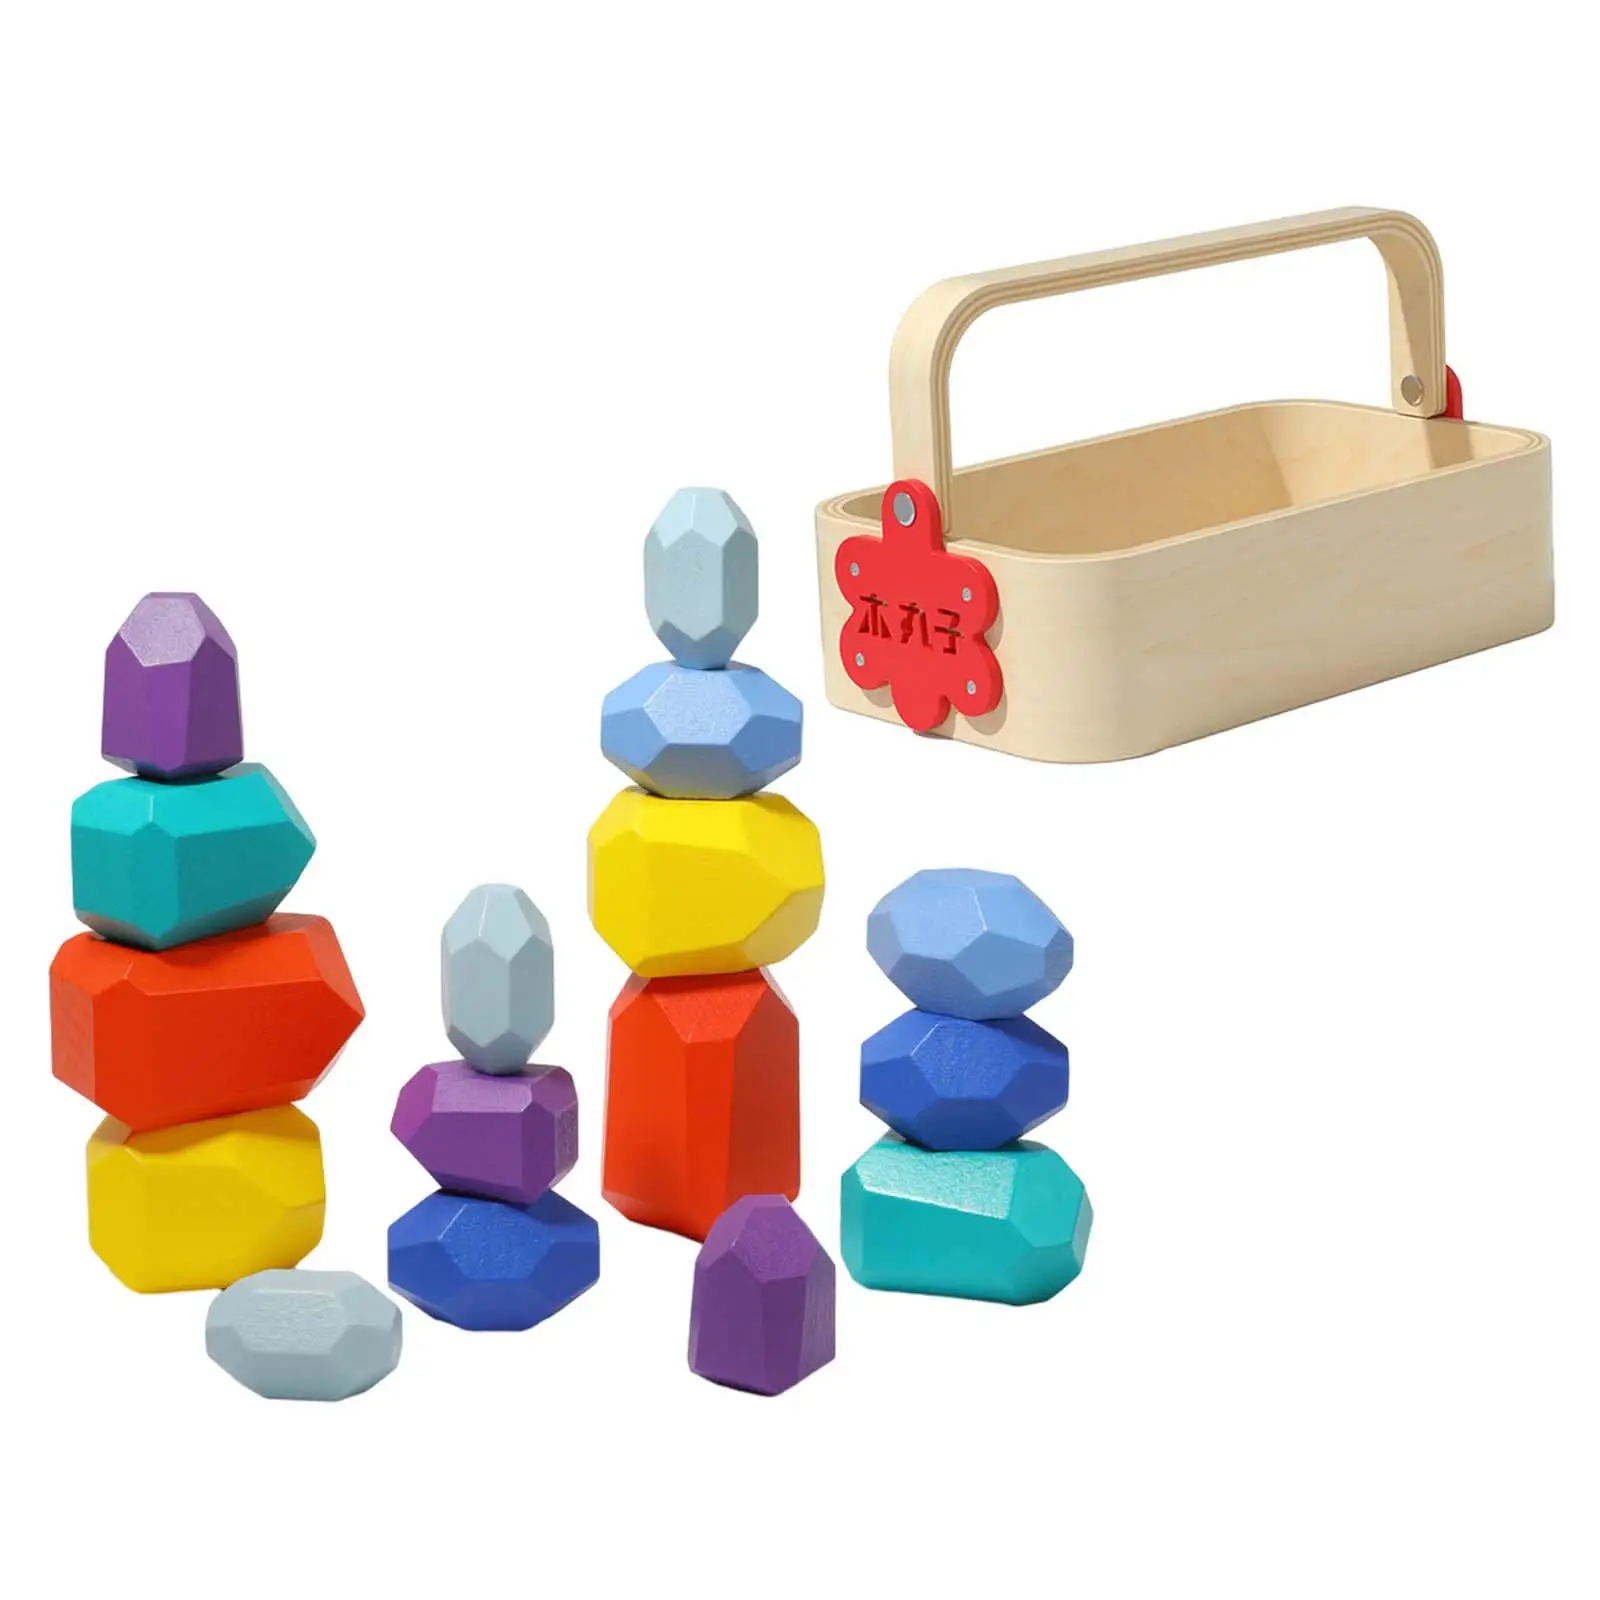 Stacking Blocks Rocks Hands on with Basket Educational Toy Colorful Building Blocks for Kid 3 Years up Children Boys Girls Gifts